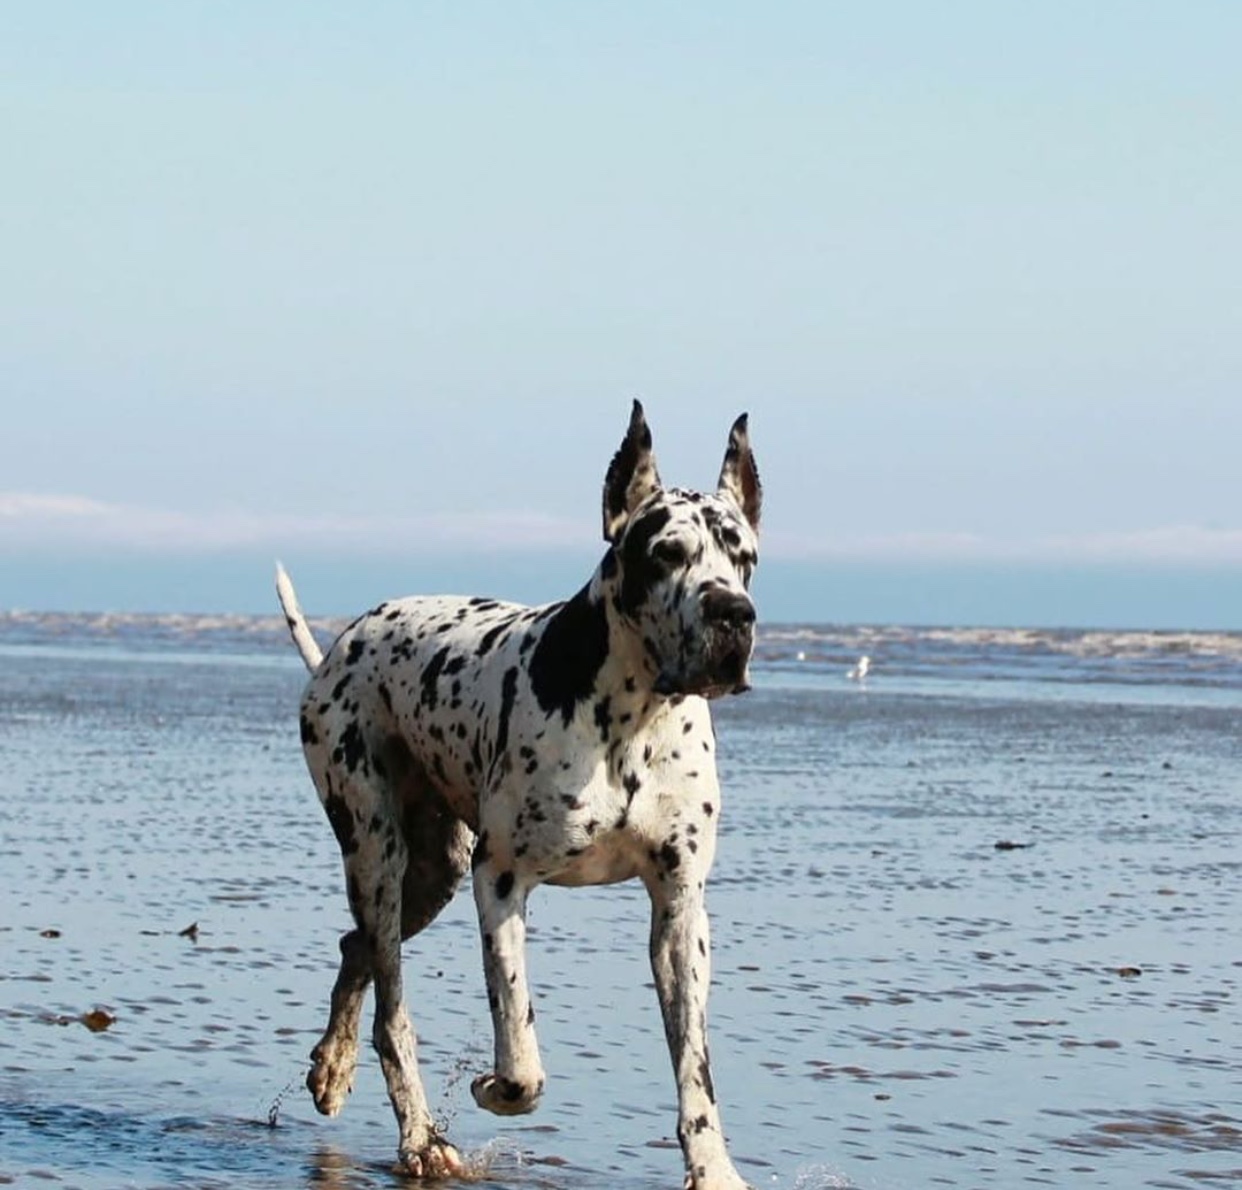 A Great Dane running by the seashore